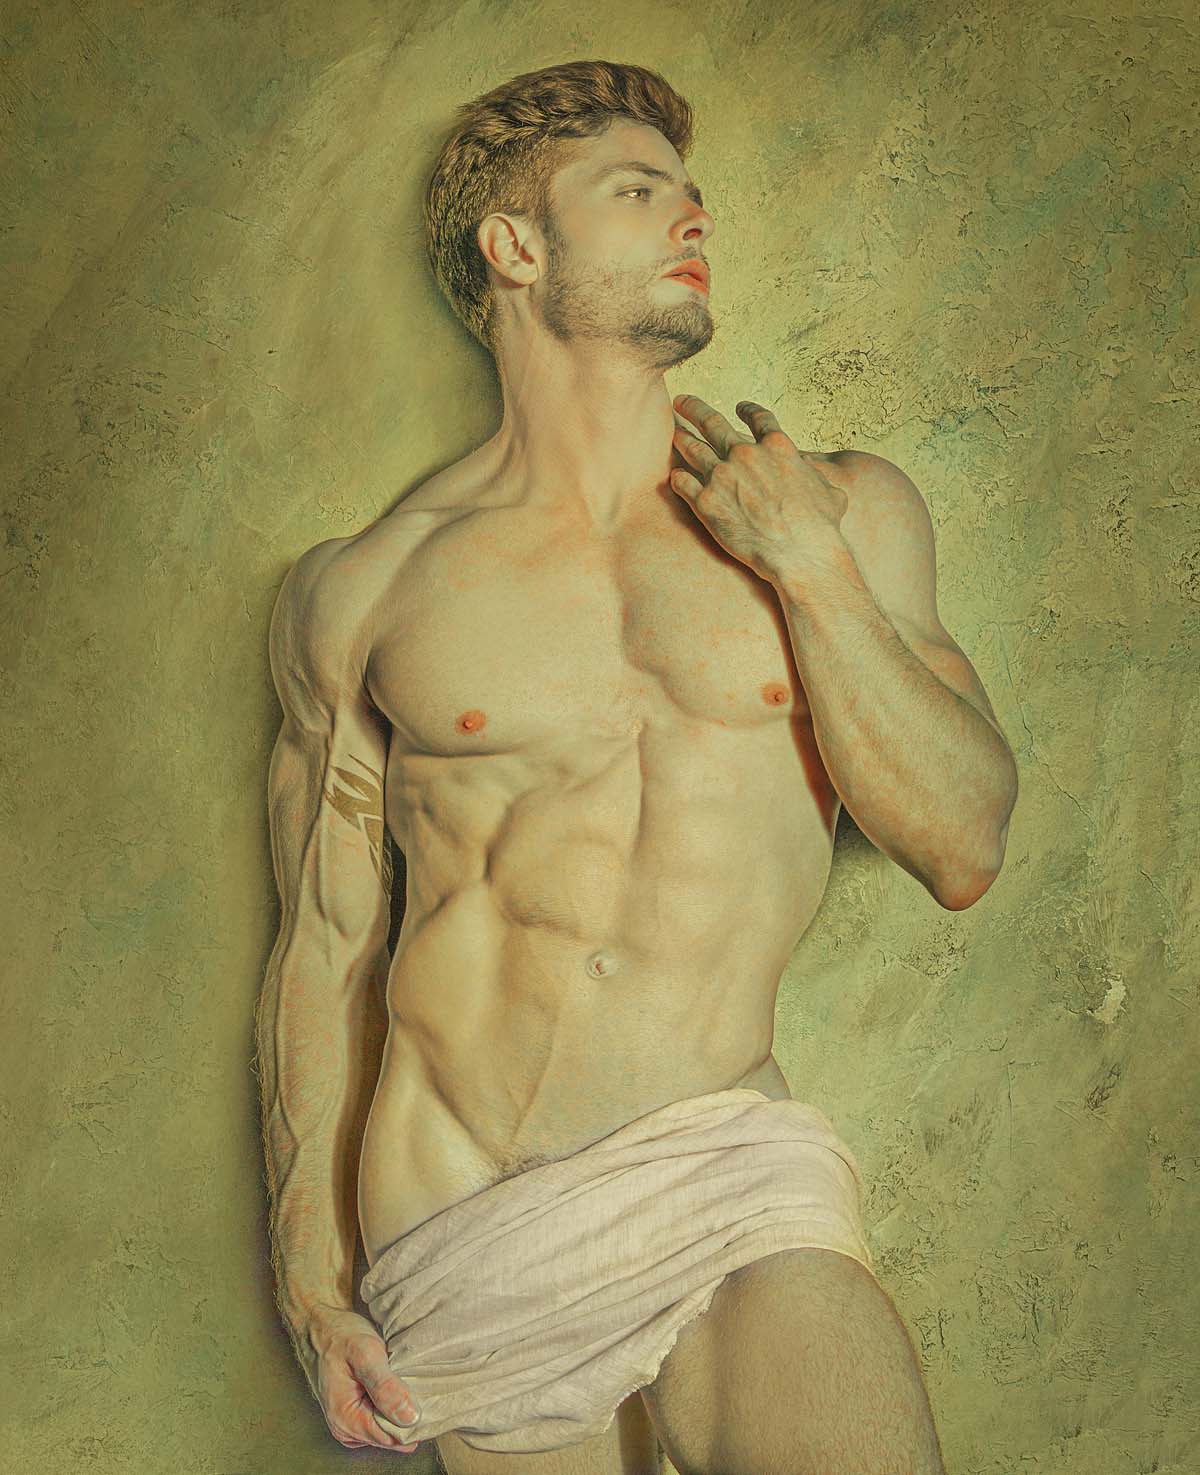 Male-Nude-Paintings-and-Male-Nude-Sculptures---Modern-Male-Nude-Photography-by-Troy-Schooneman.jpg